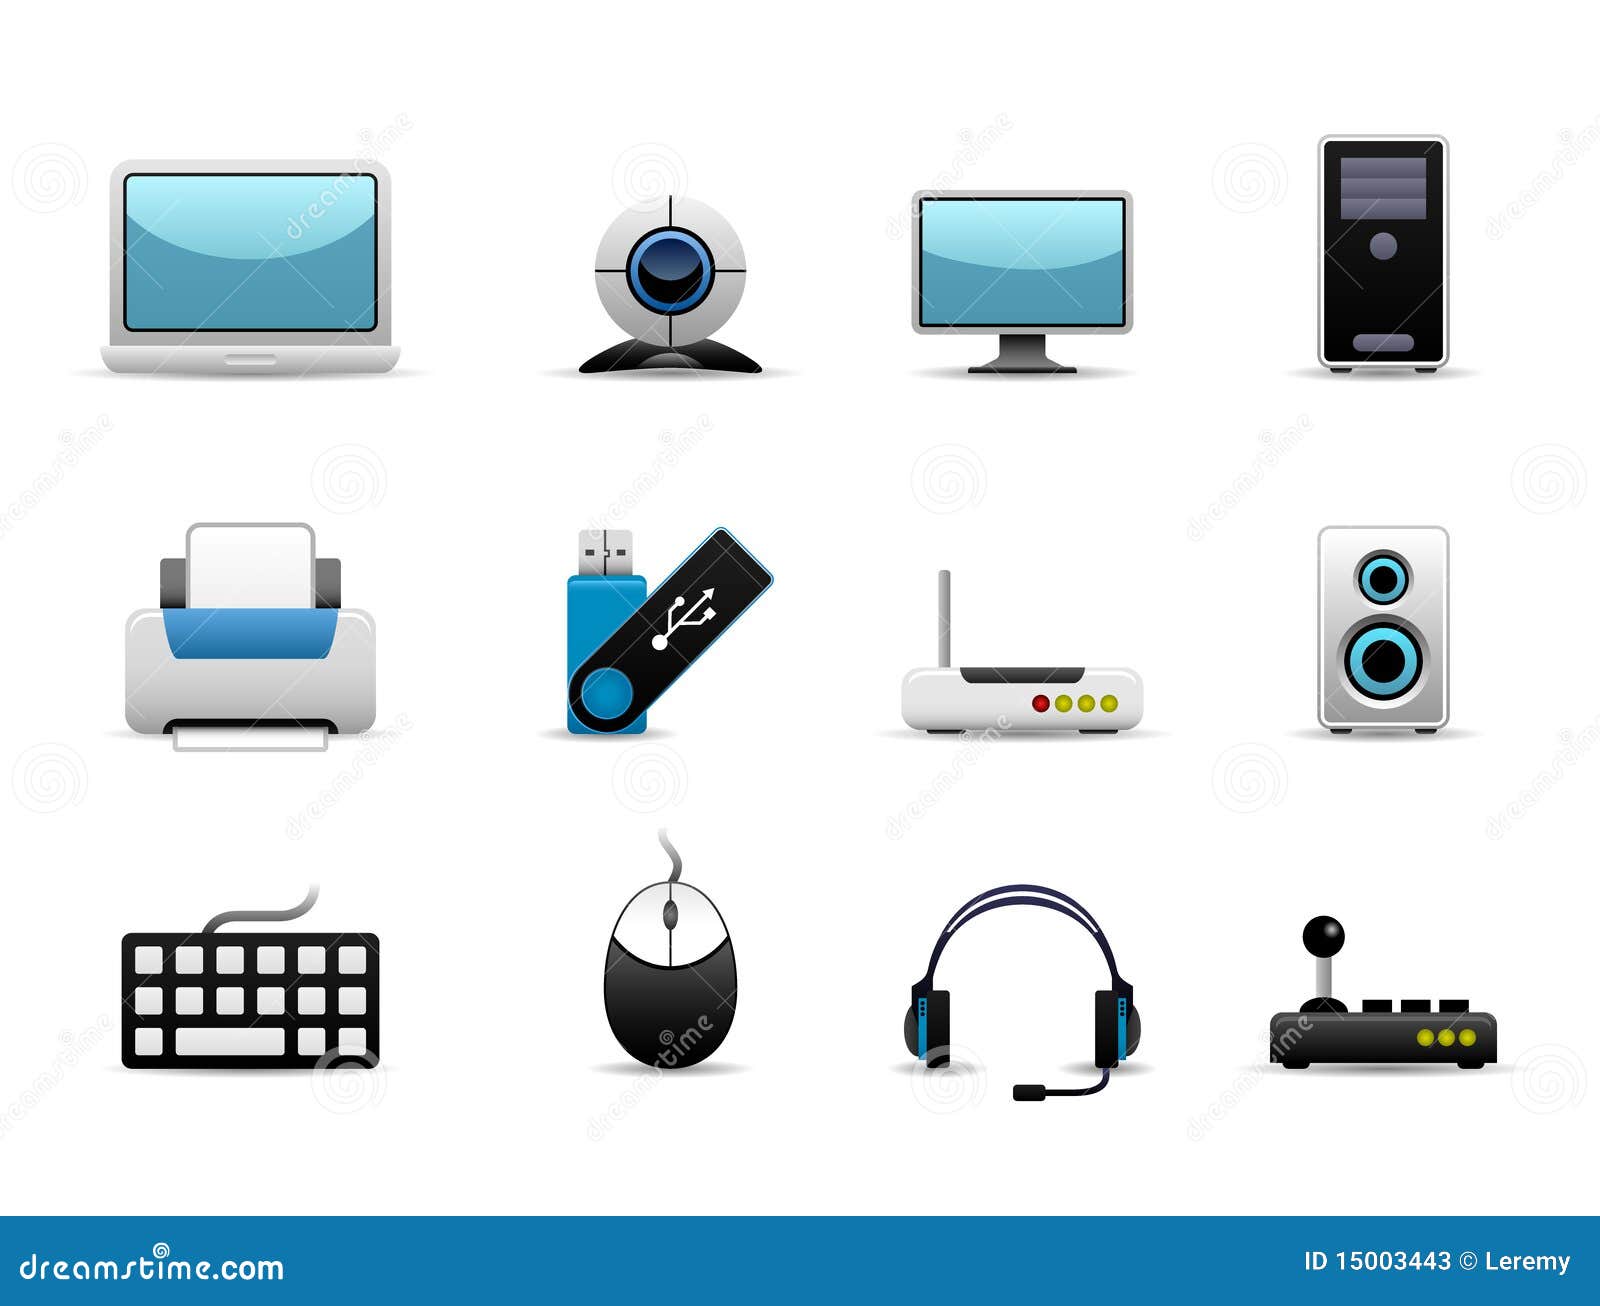 computer hardware clipart free download - photo #47